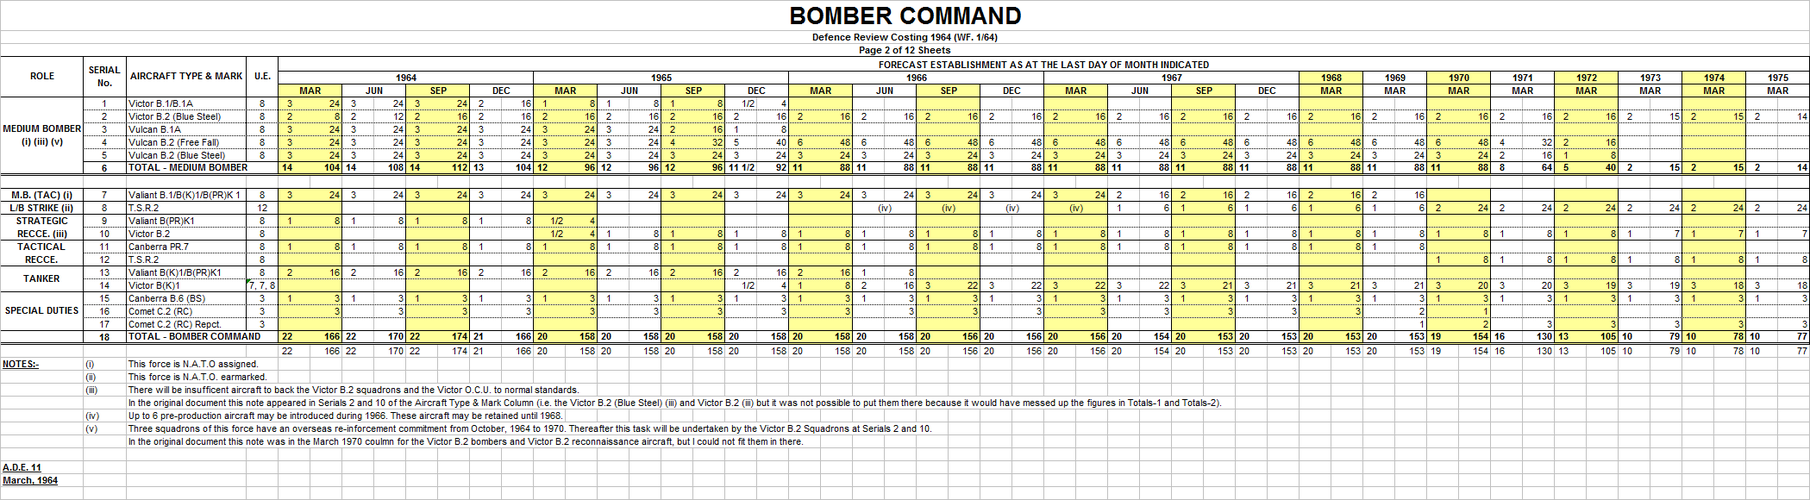 Plan P Bomber Command at March 1964.png